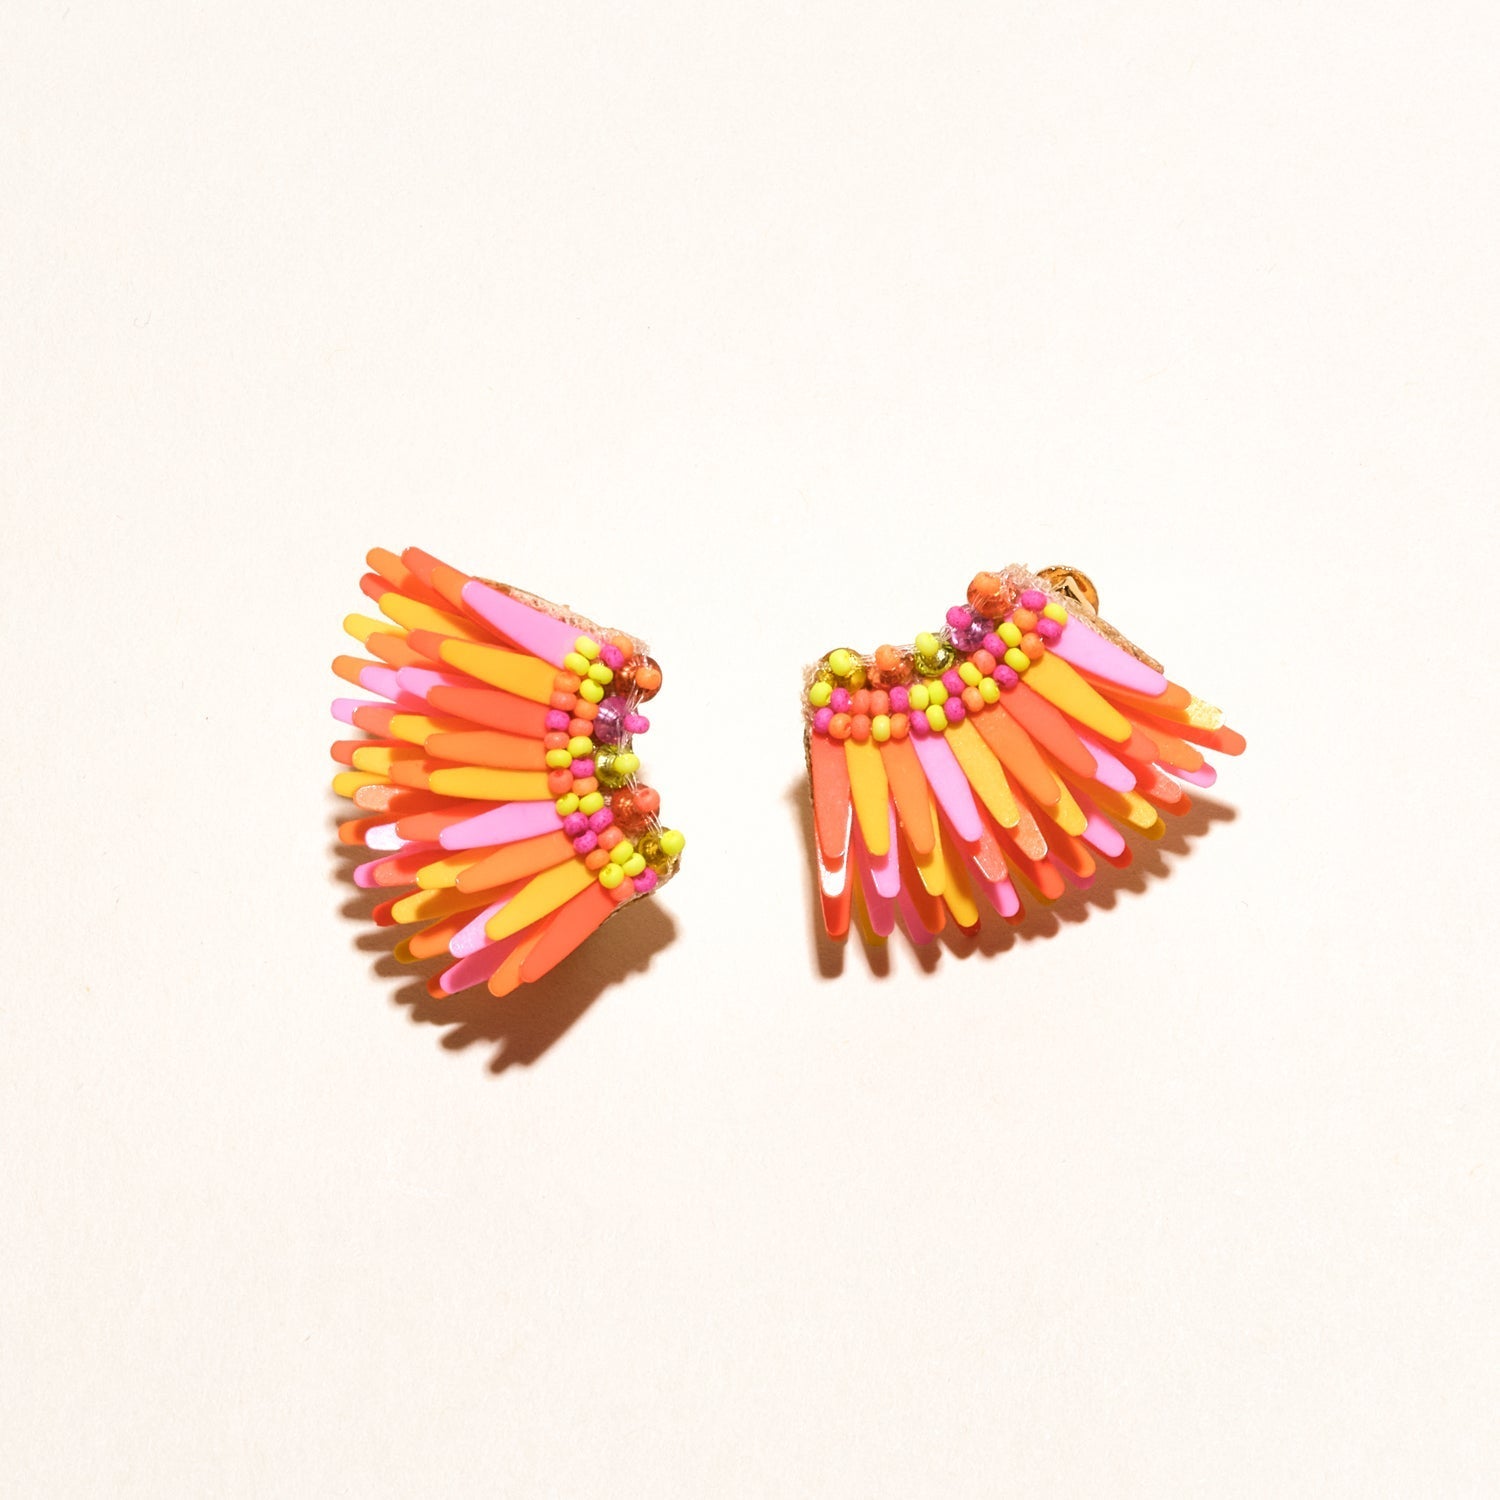 Micro Madeline Earrings Bright Yellow/Neon Pink Beads by Mignonne Gavigan